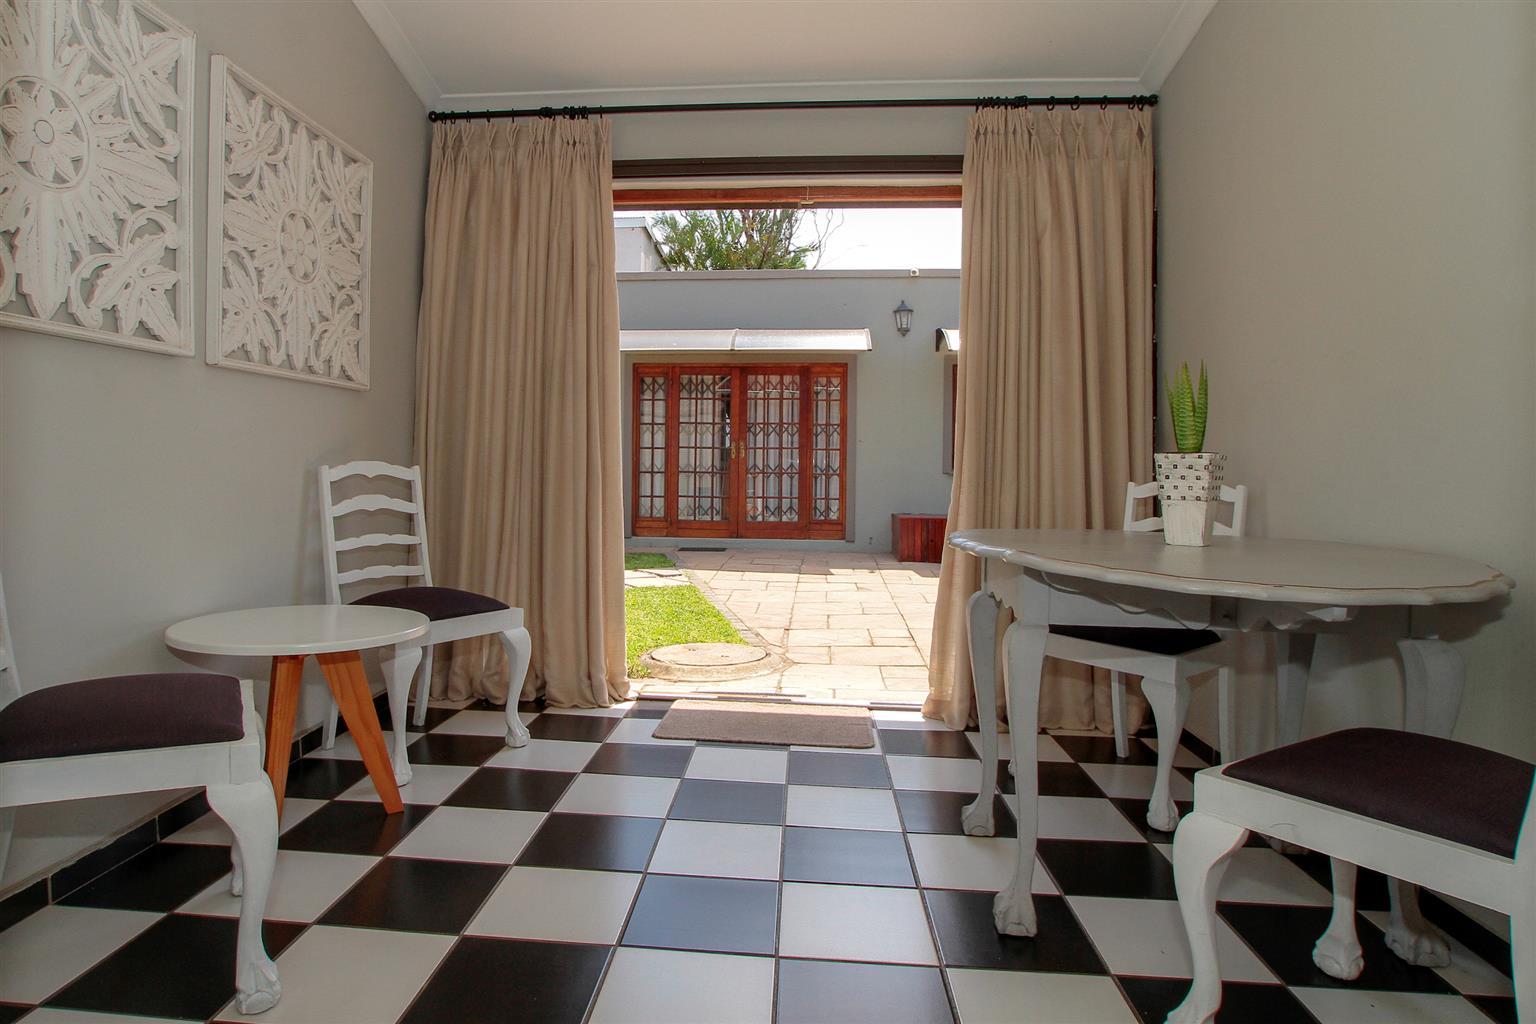 Accommodation available at Beechwood Guesthouse